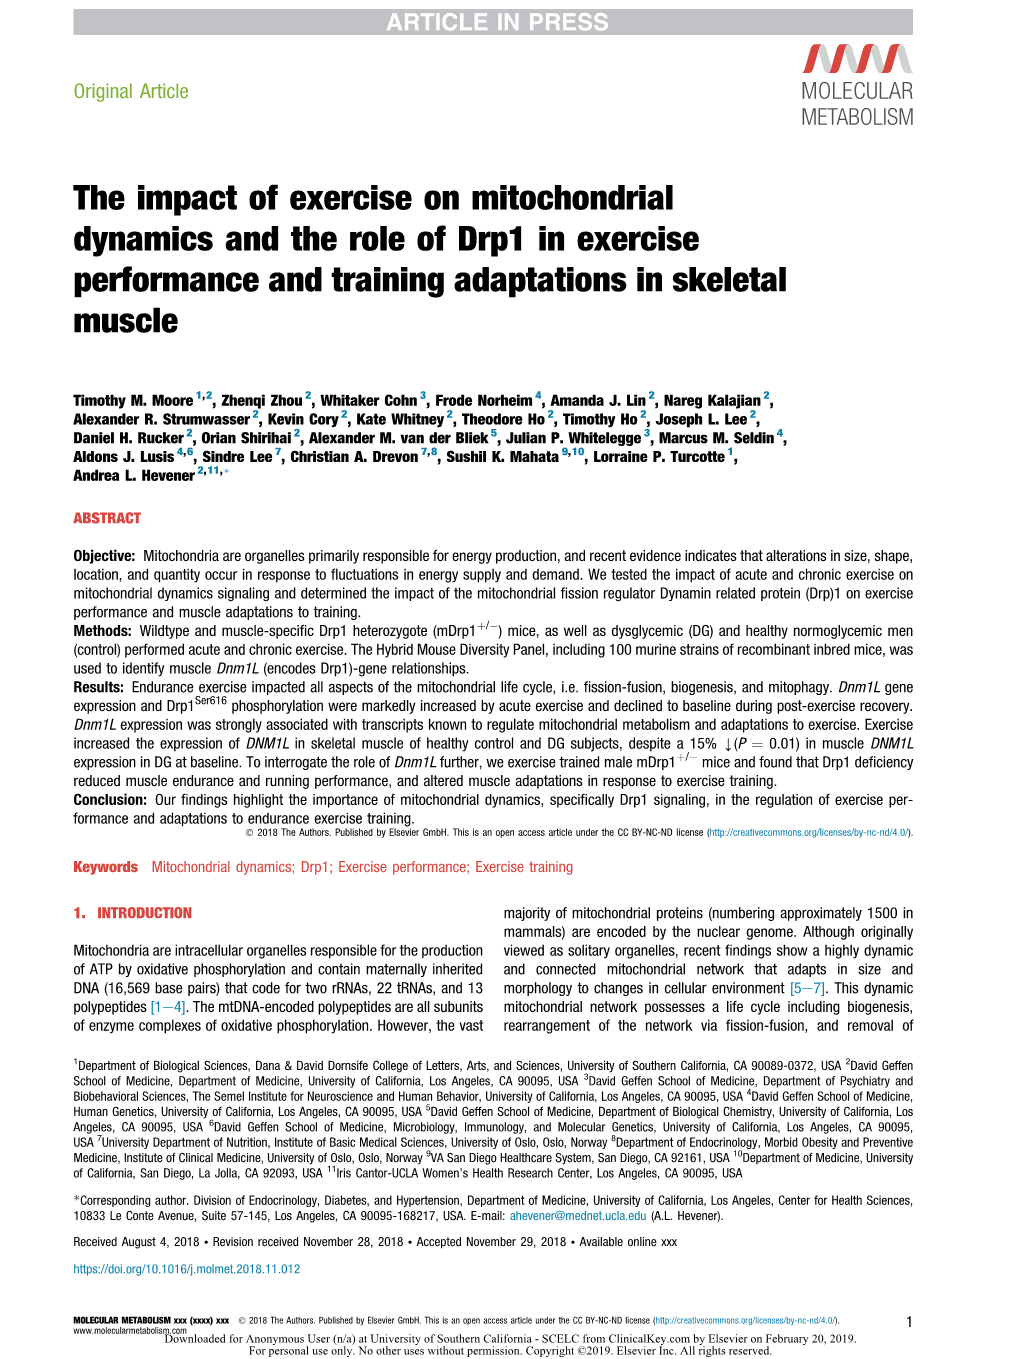 The Impact of Exercise on Mitochondrial Dynamics and the Role of Drp1 in Exercise Performance and Training Adaptations in Skeletal Muscle